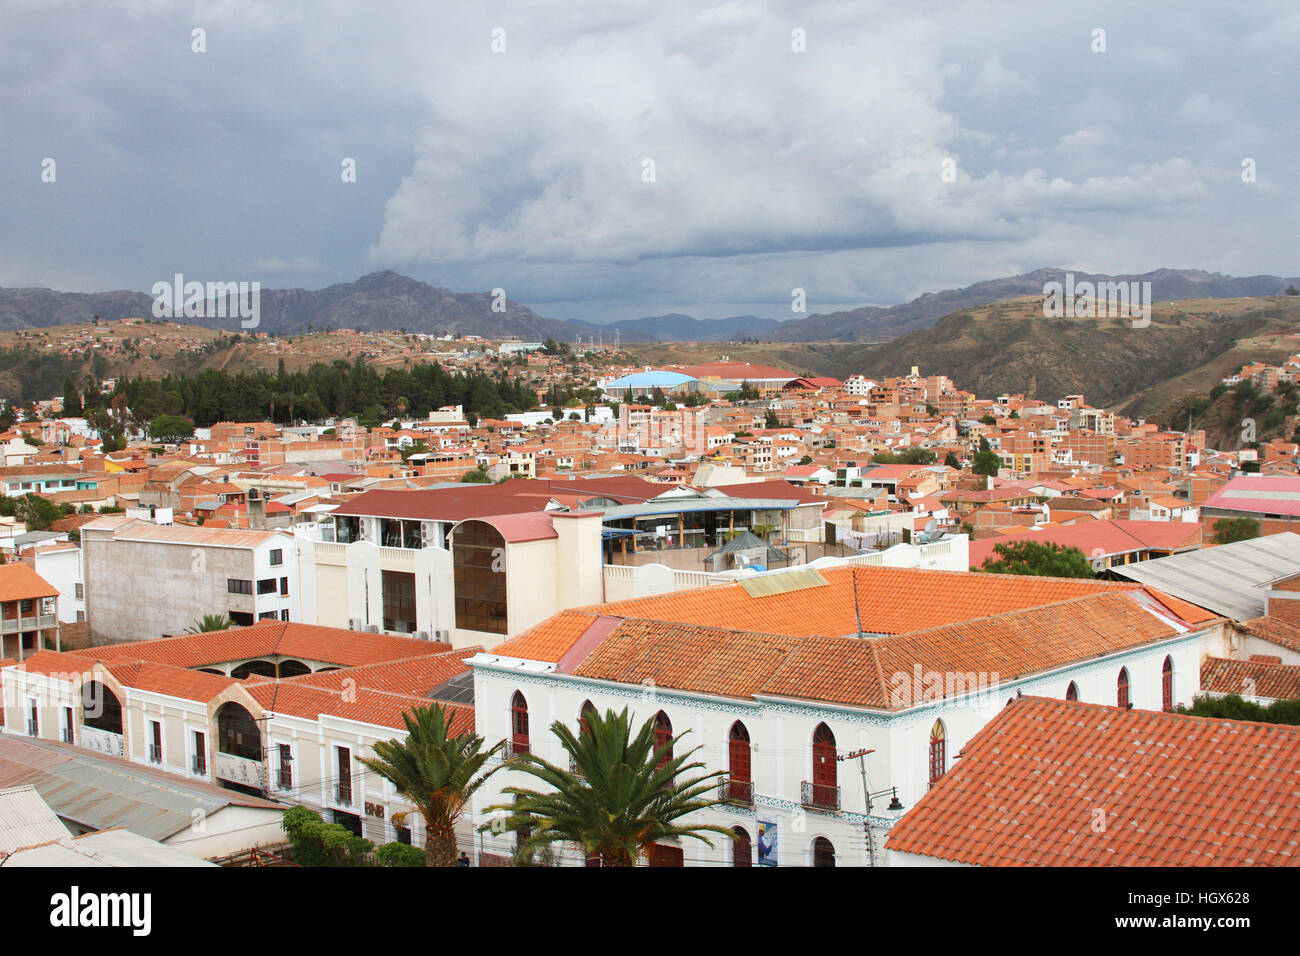 Sucre, Bolivia - December 7, 2016: Rooftop view with terracotta tiles of Sucre, Bolivia on December 7, 2016 Stock Photo